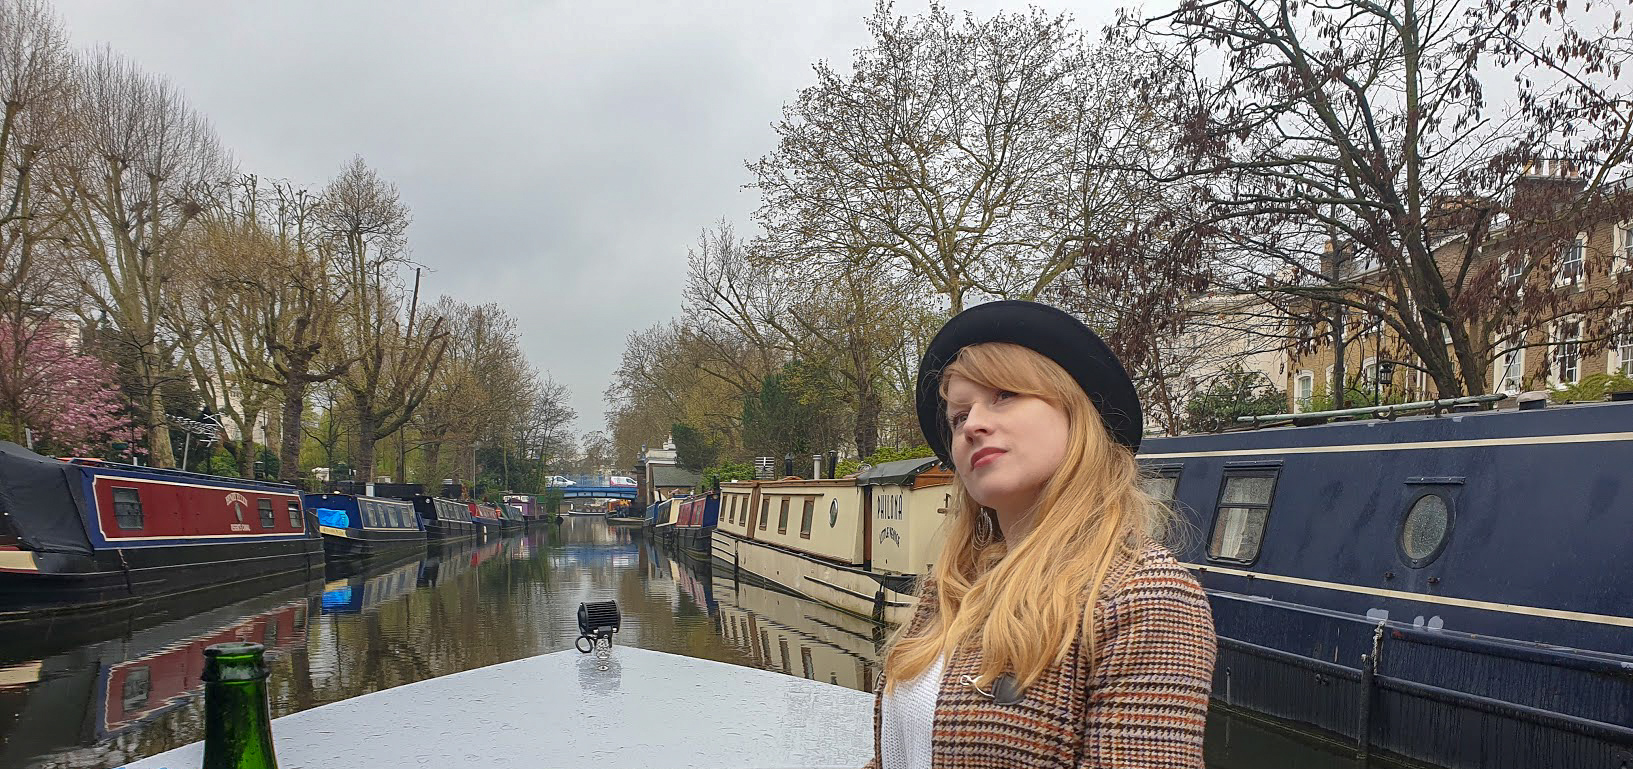 Rosie on a boat on the canal with canal boats and trees on either side